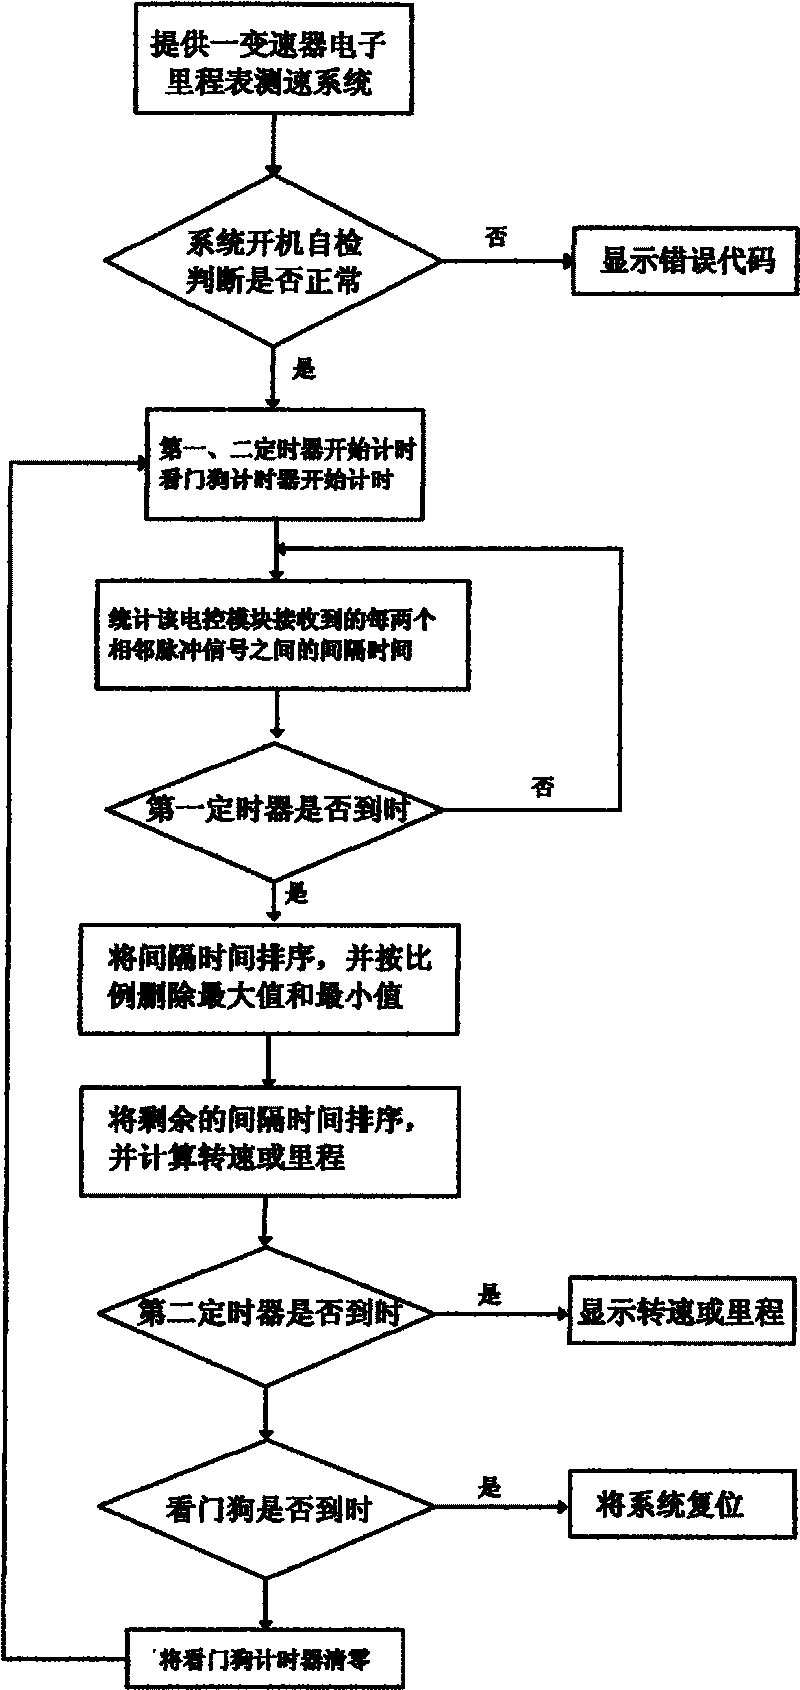 Transmission electronic odometer speed-measuring system and method